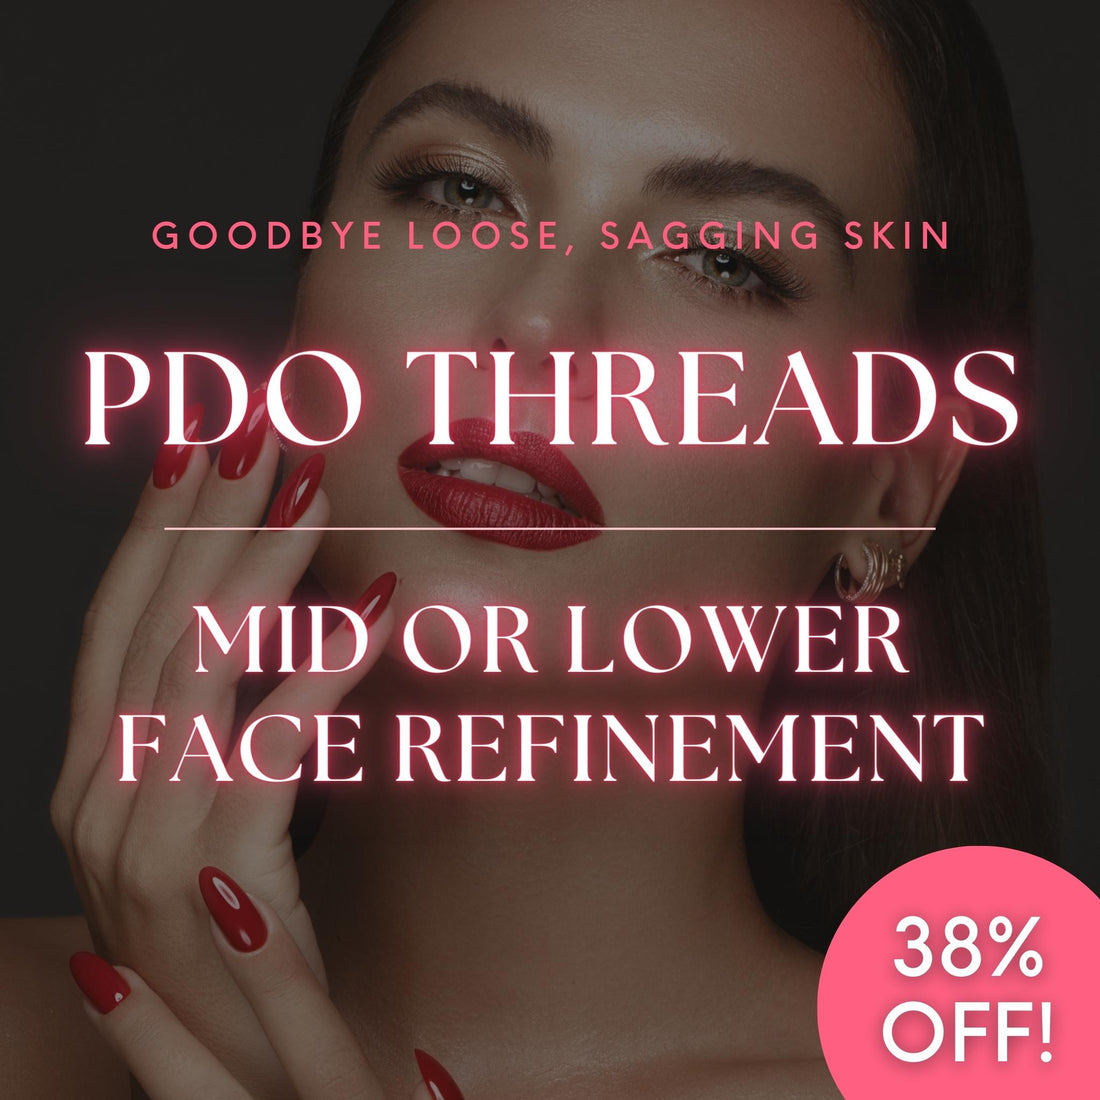 PDO Threadlift: Mid or Lower Face Refinement